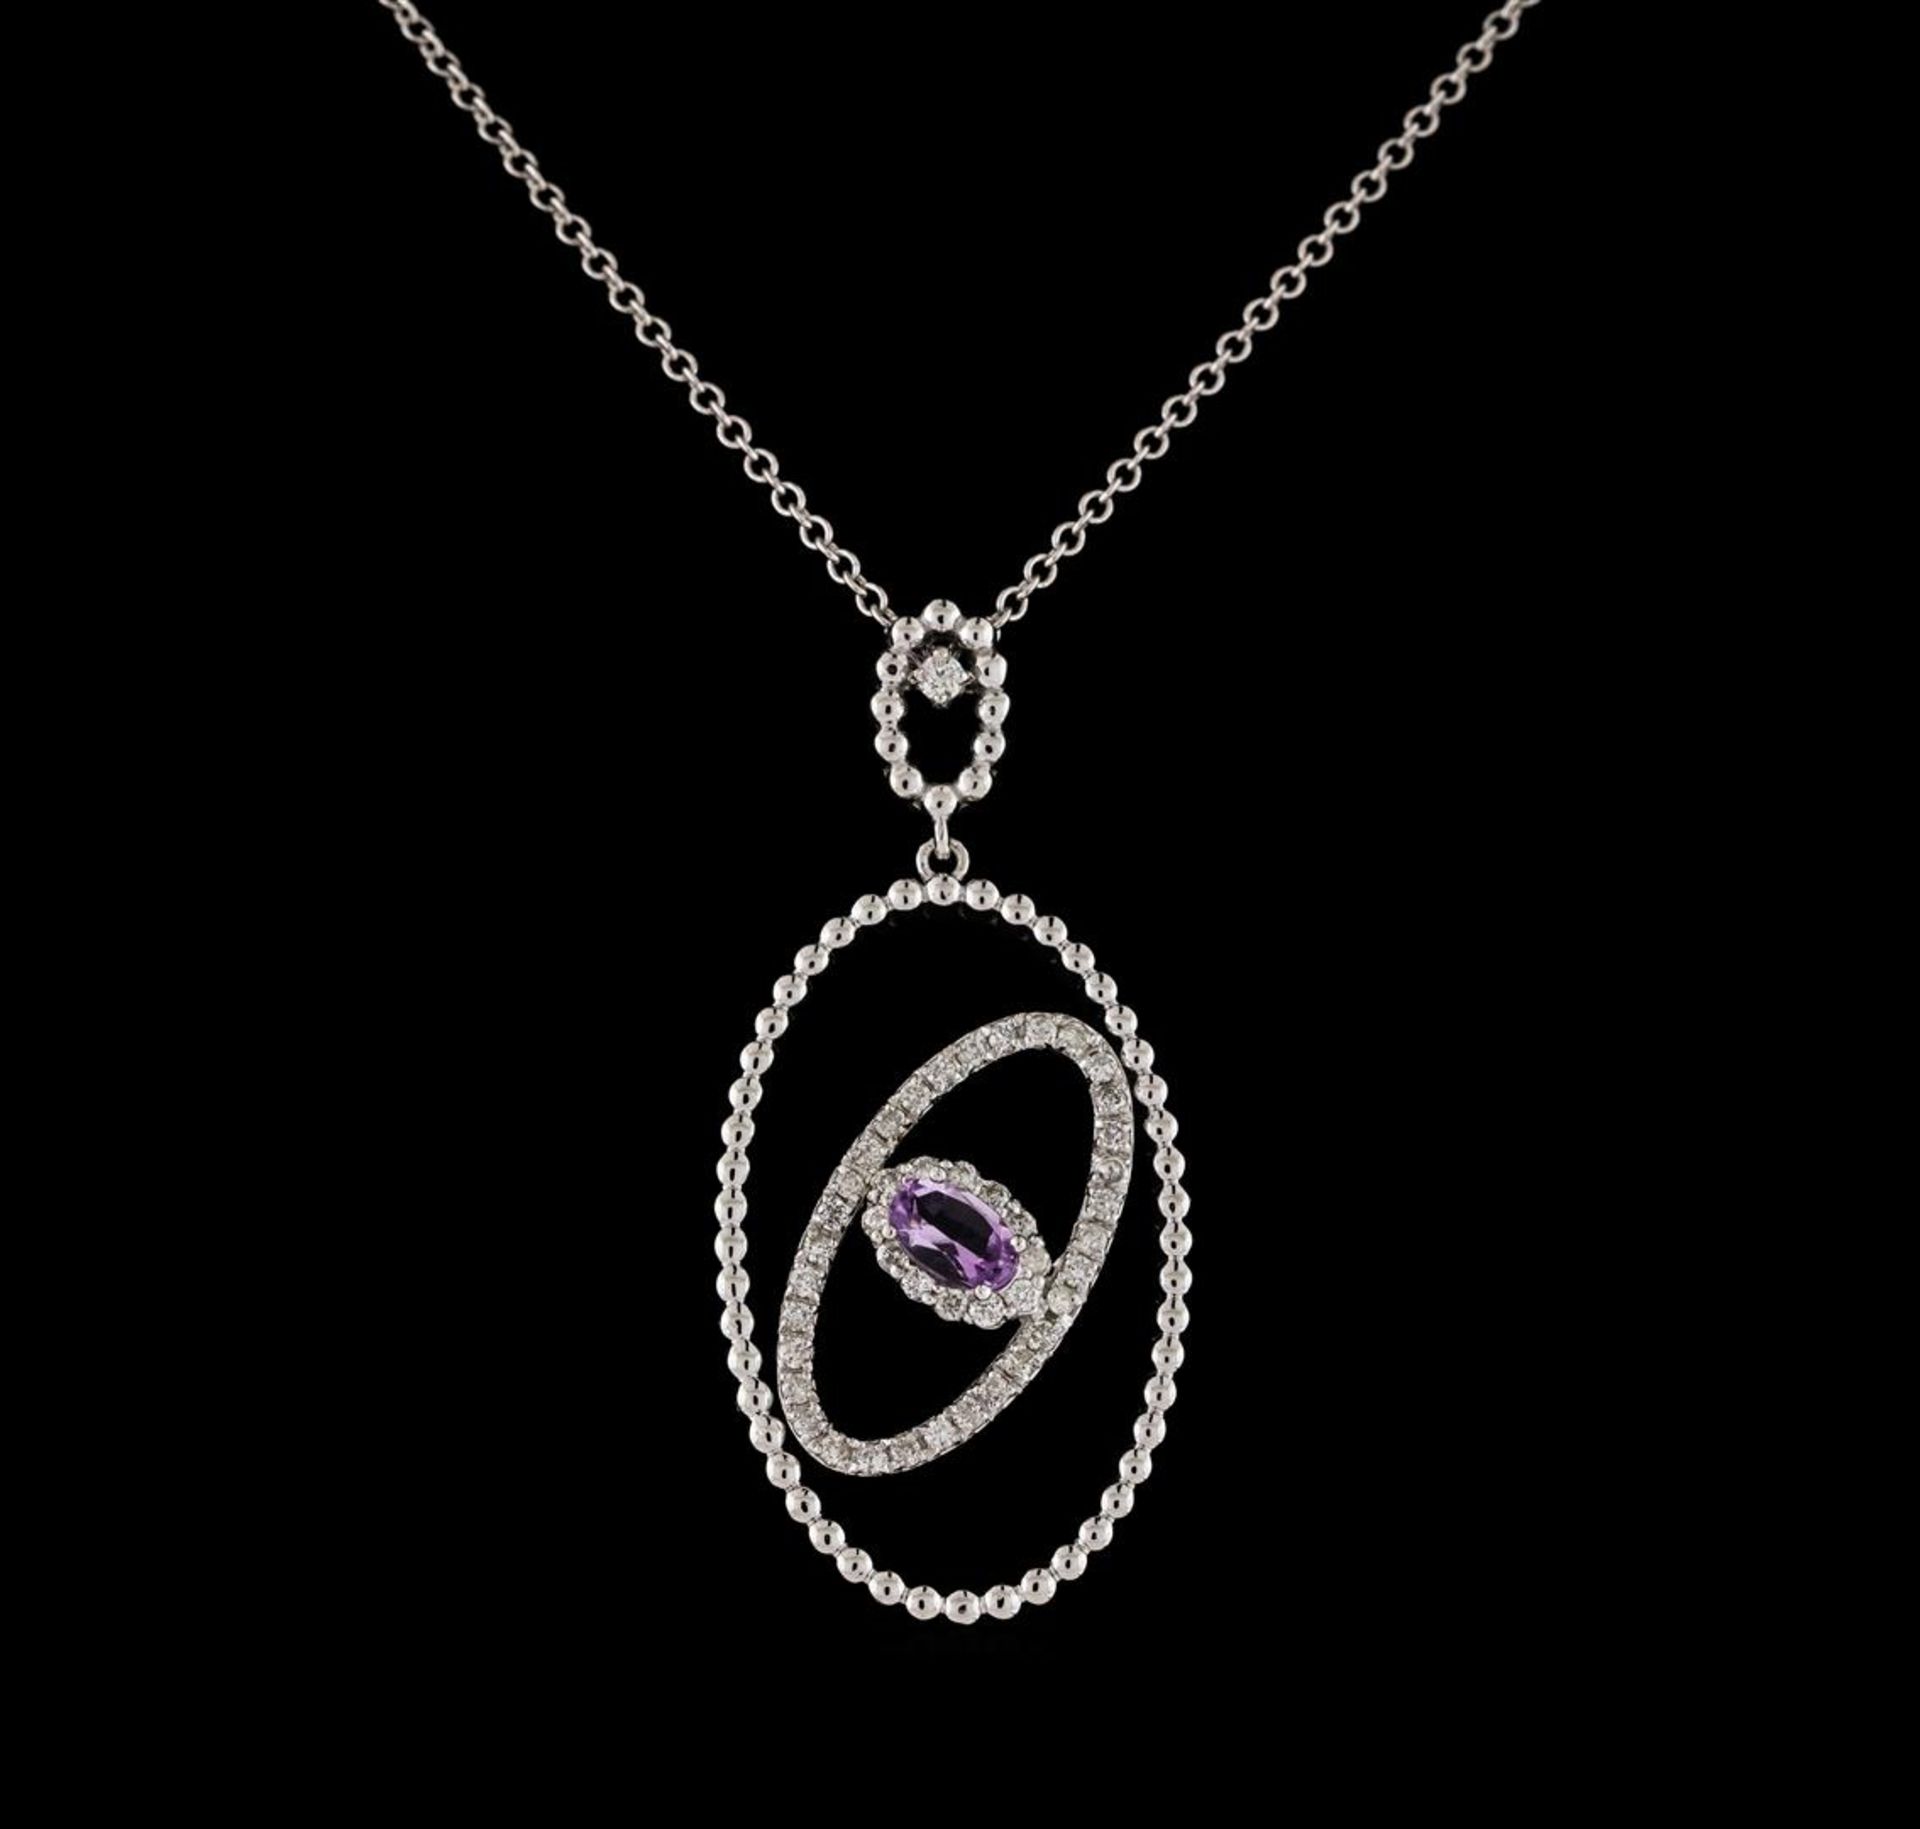 0.25 ctw Morganite and Diamond Pendant With Chain - 14KT White Gold - Image 2 of 2